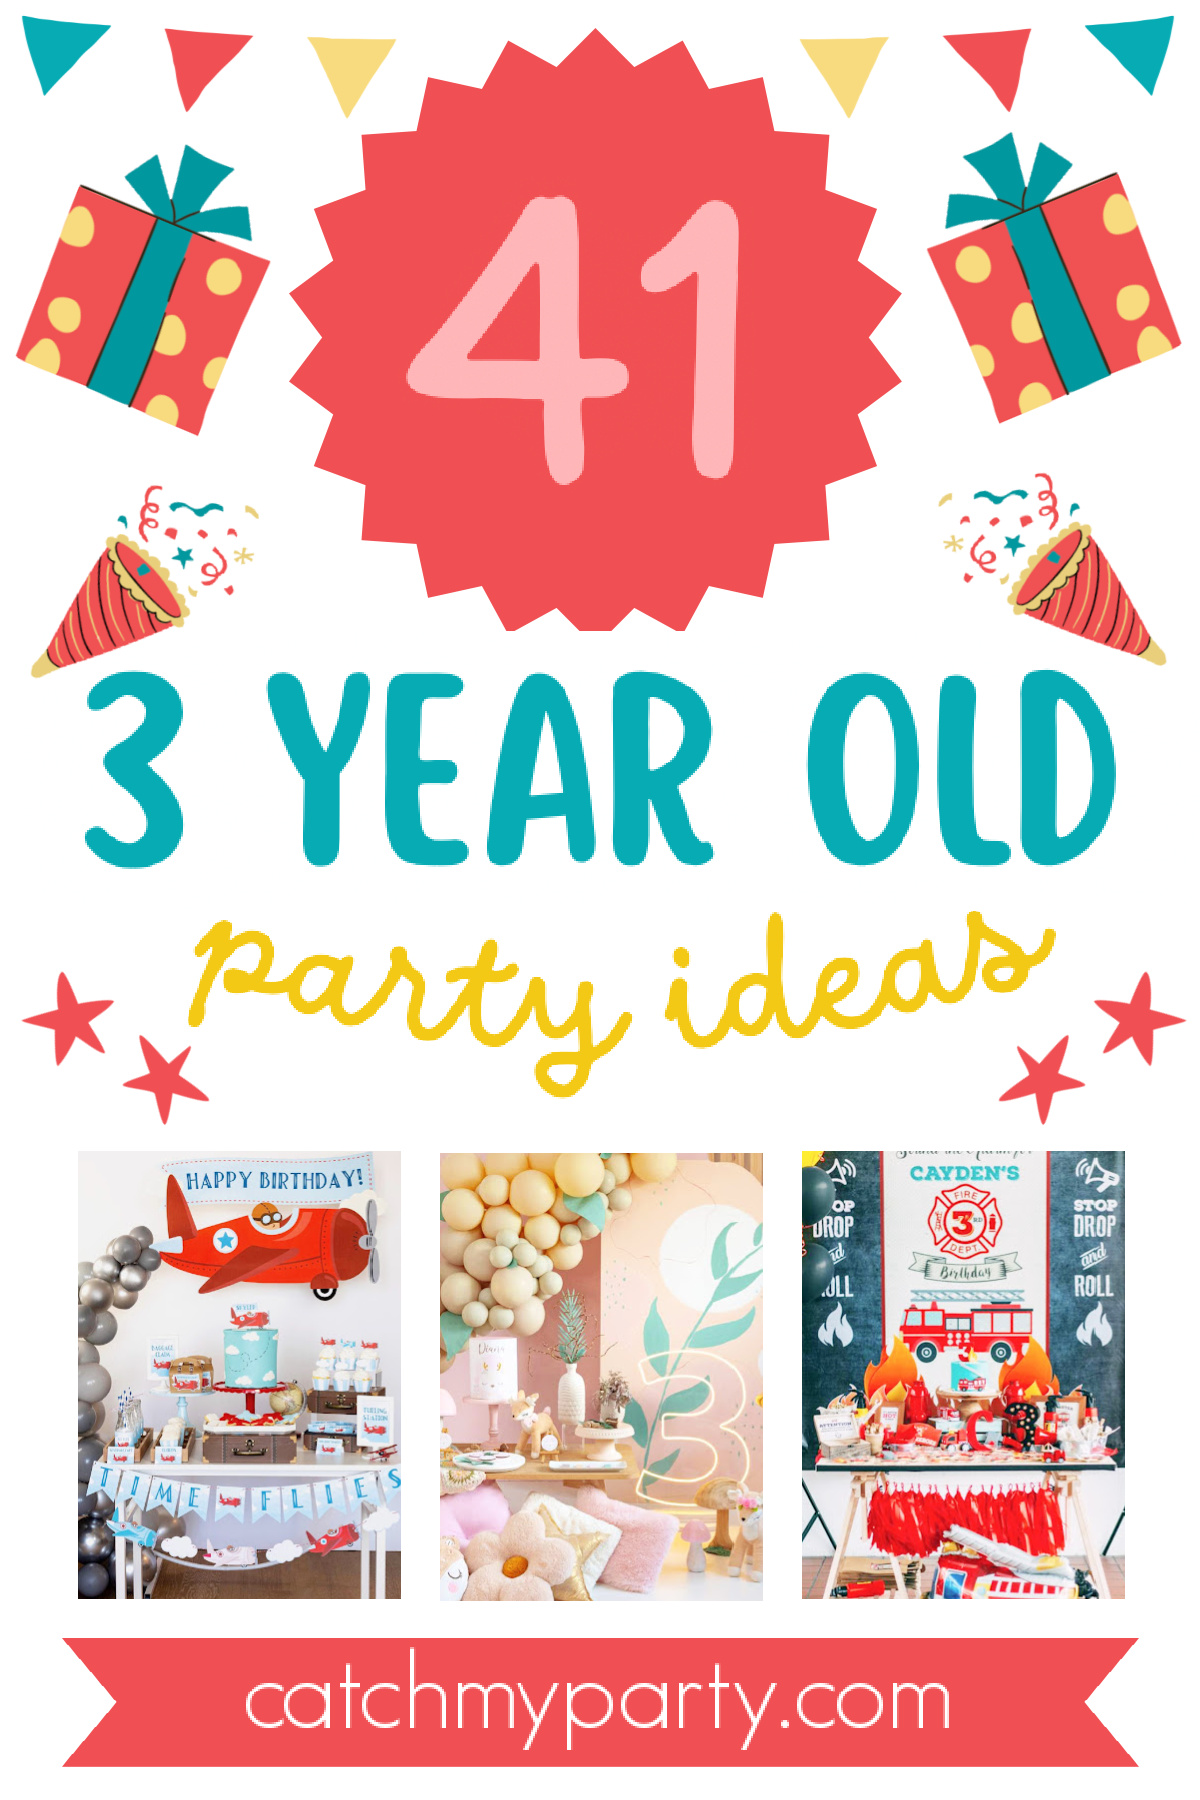 41 Amazing 3 Year Old Party Ideas For Girls and Boys!